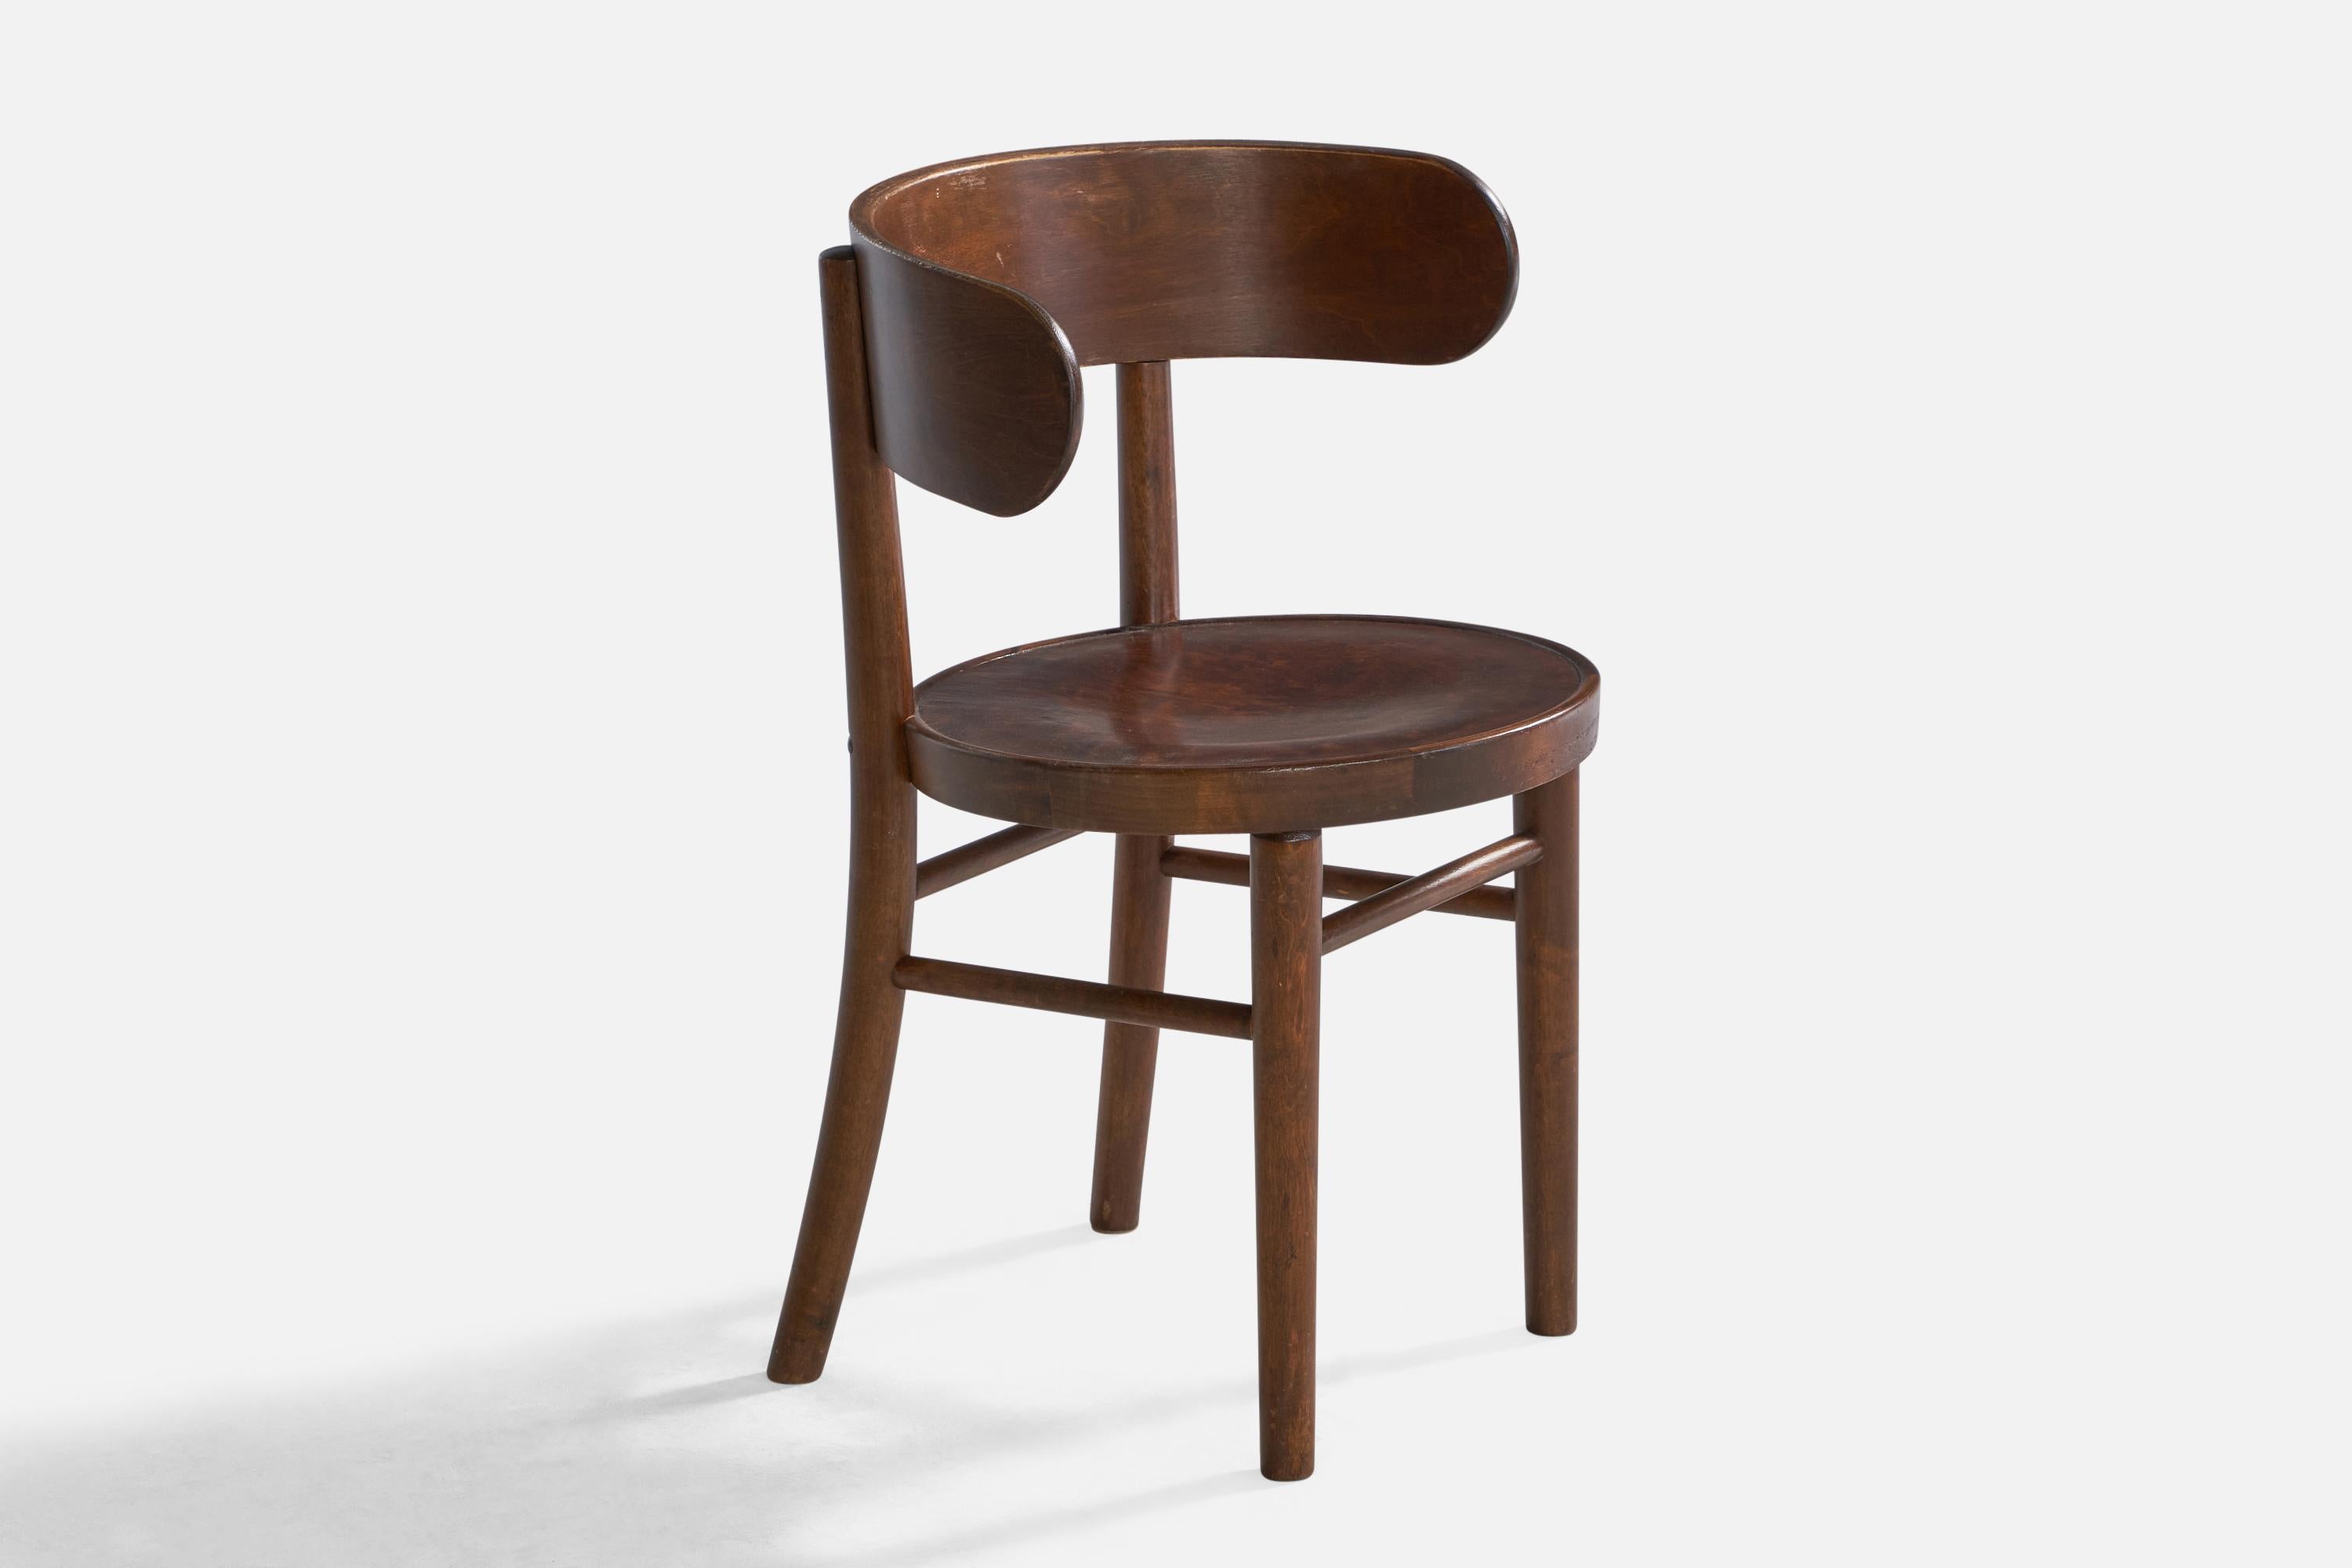 A stained bentwood side chair designed by Werner West and produced by Wilhelm Schauman Fanerfabrik AB, Jyväskylä, Finland, 1930s.

Seat height: 17.38”